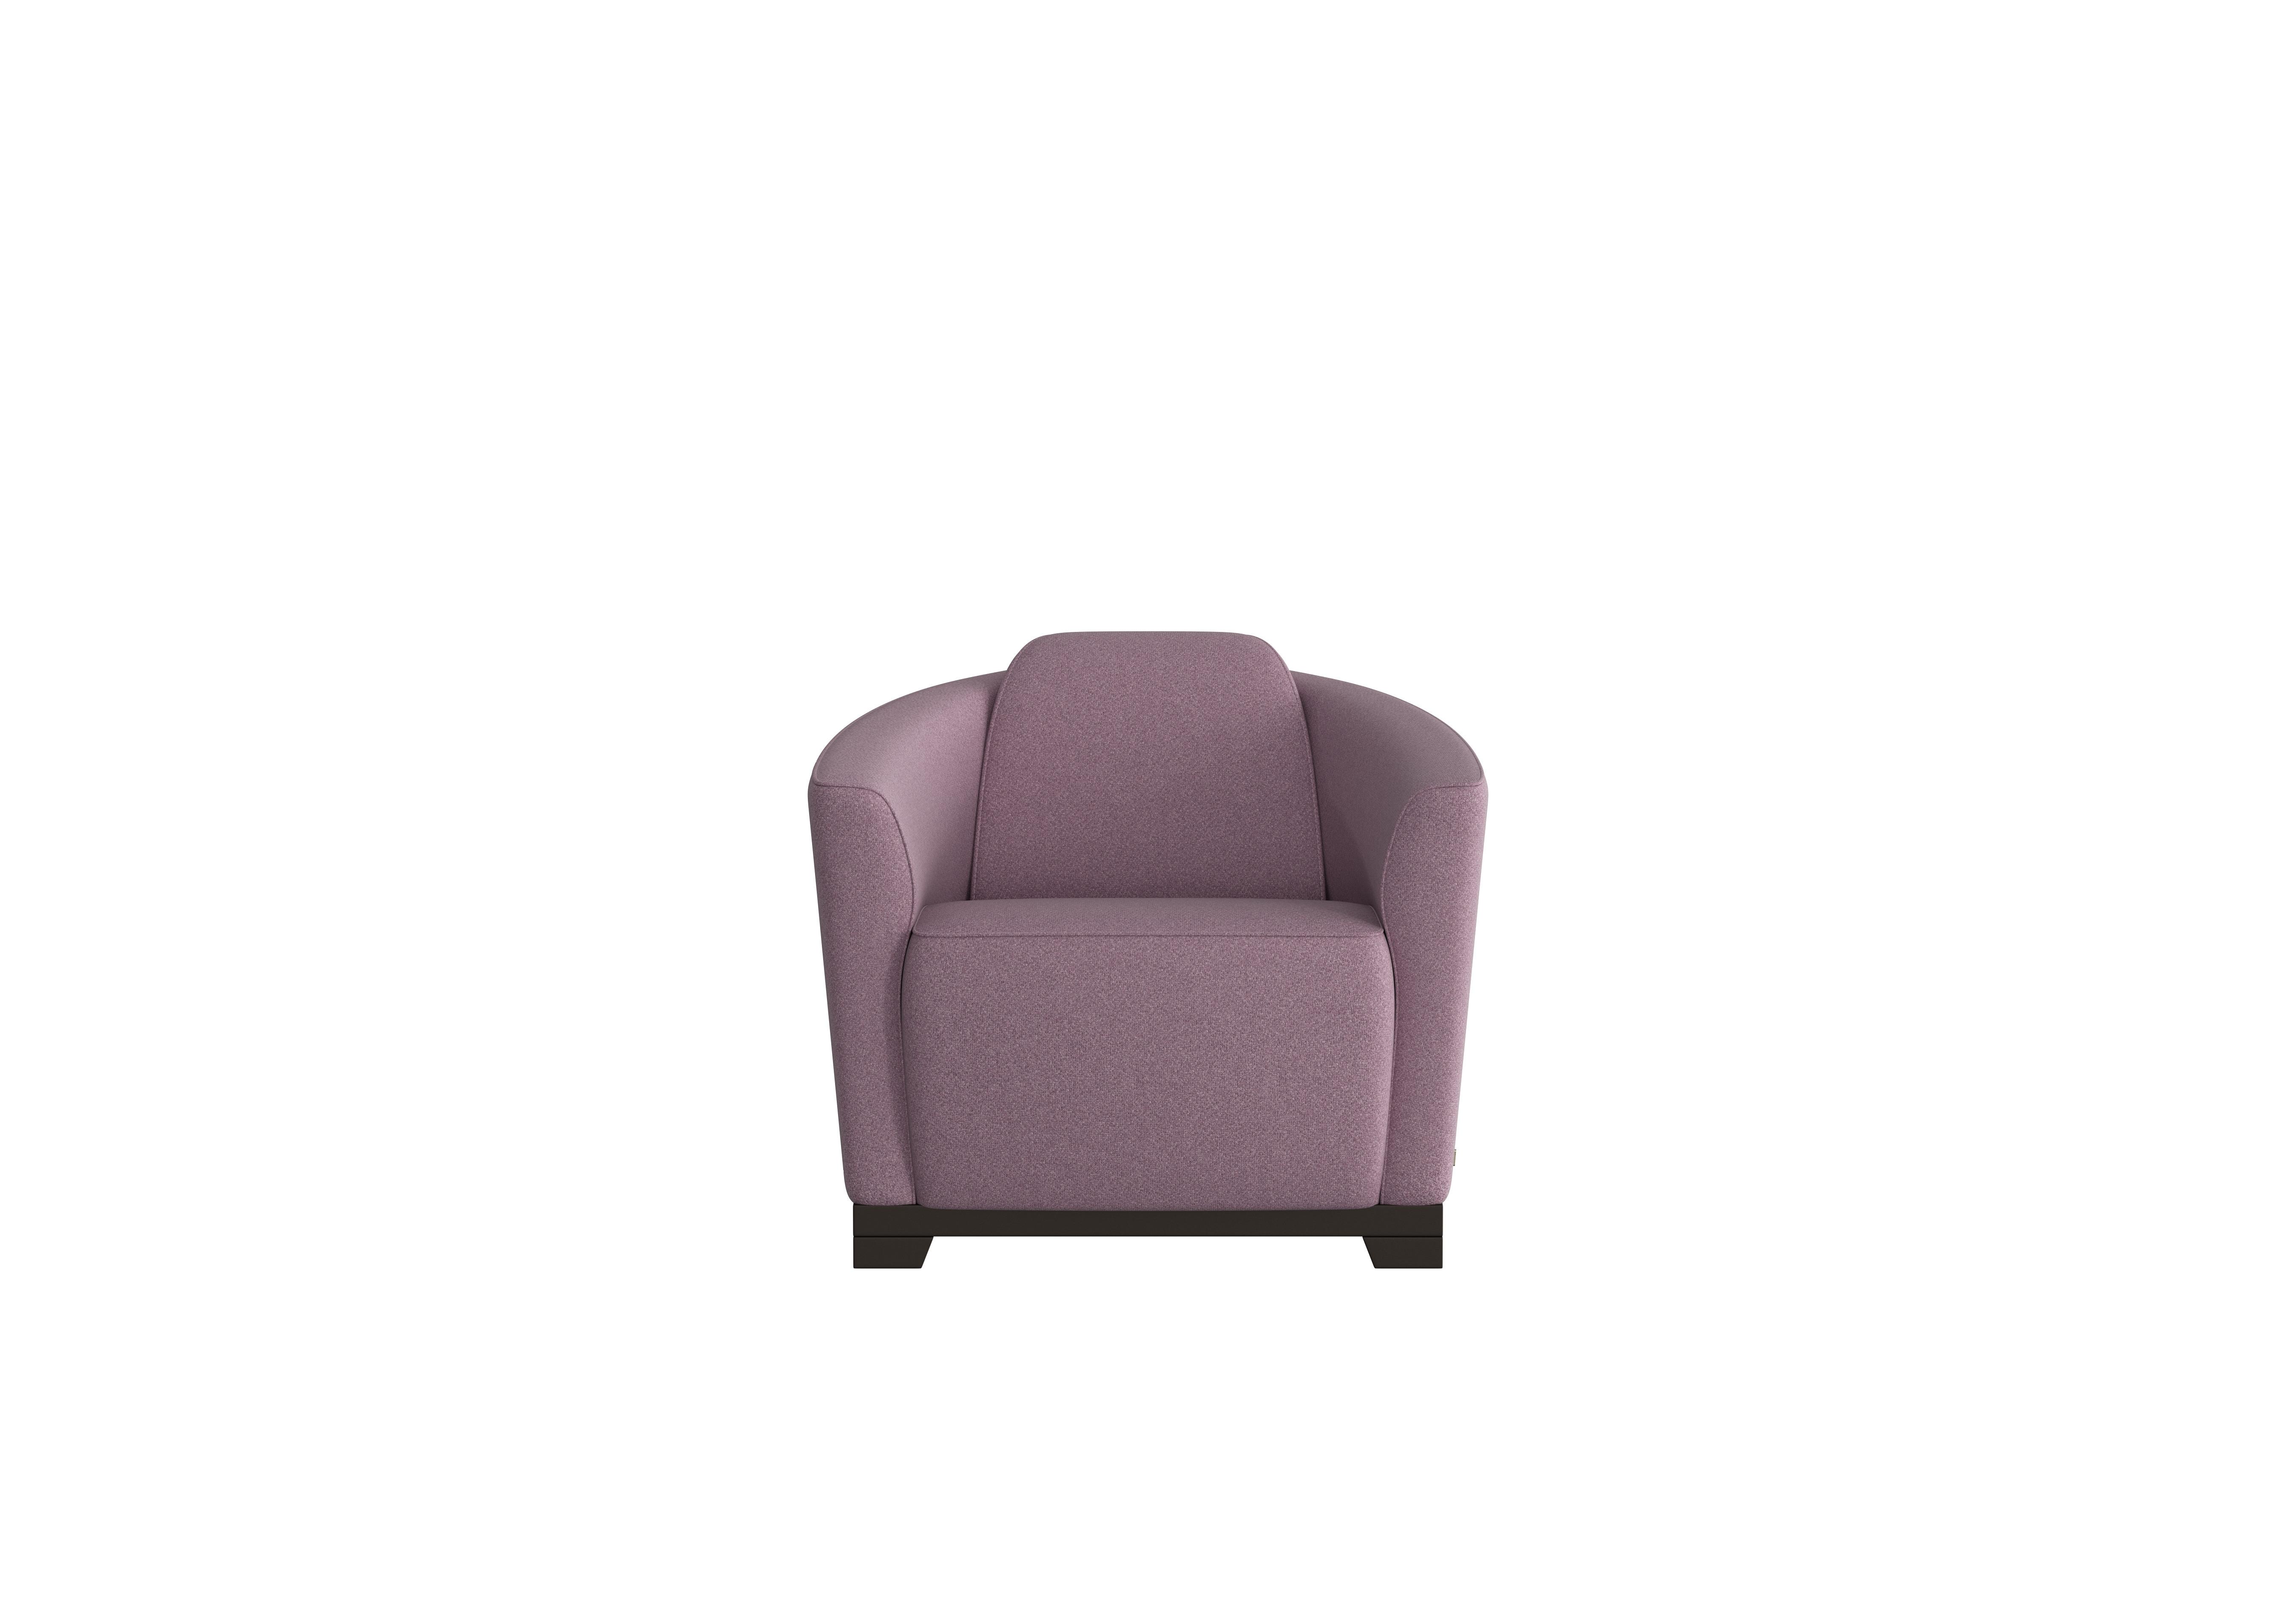 Ketty Fabric Accent Chair in Coupe Glicine 003 on Furniture Village